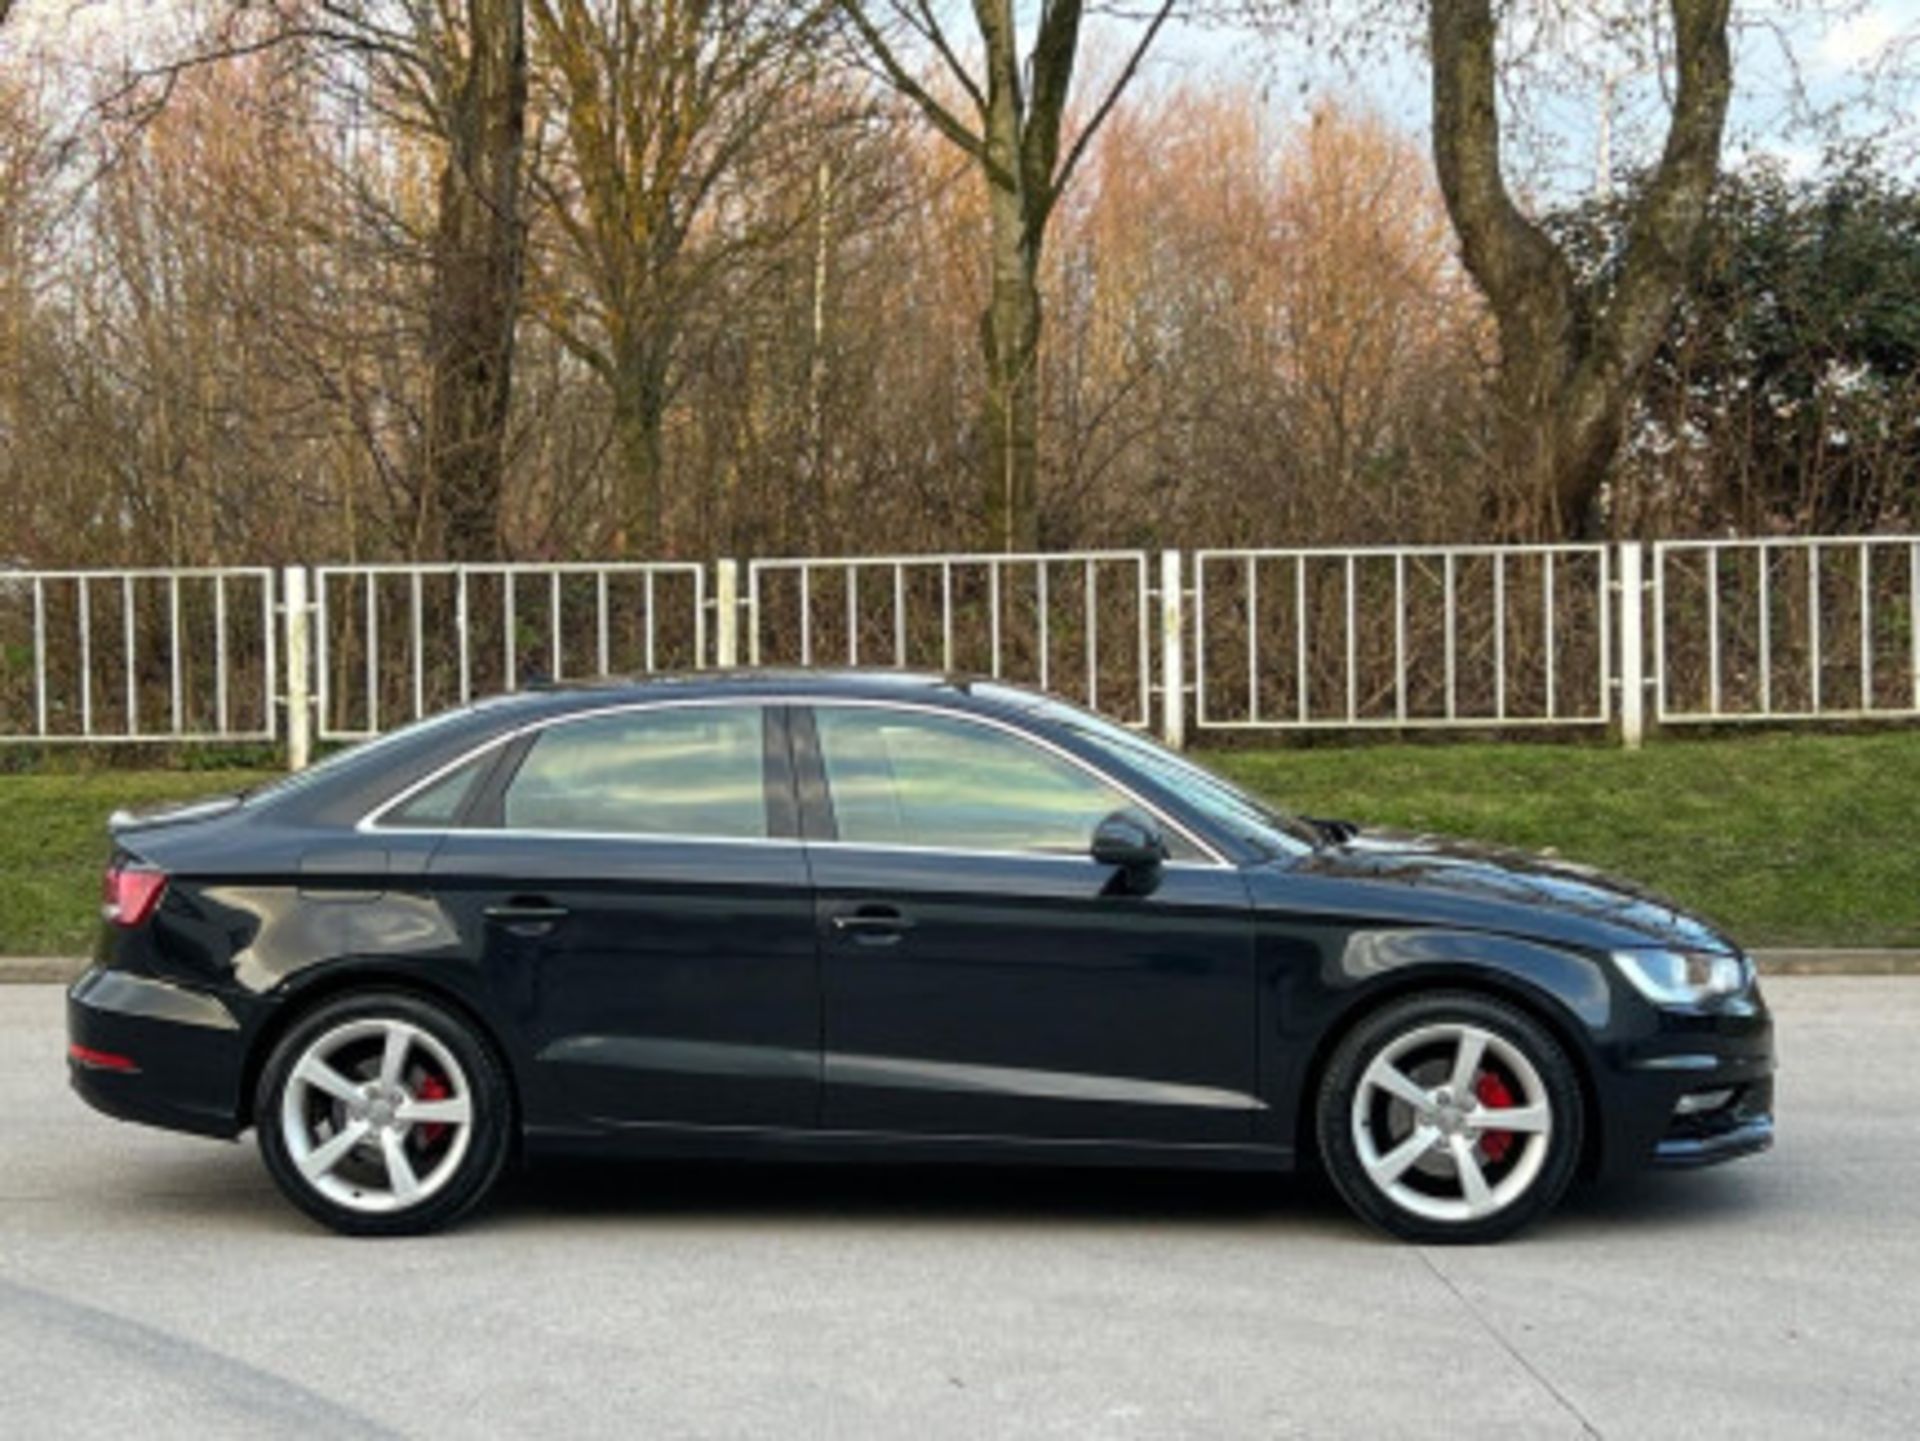 AUDI A3 2.0TDI SPORTBACK - STYLE, PERFORMANCE, AND COMFORT COMBINED >>--NO VAT ON HAMMER--<< - Image 65 of 216